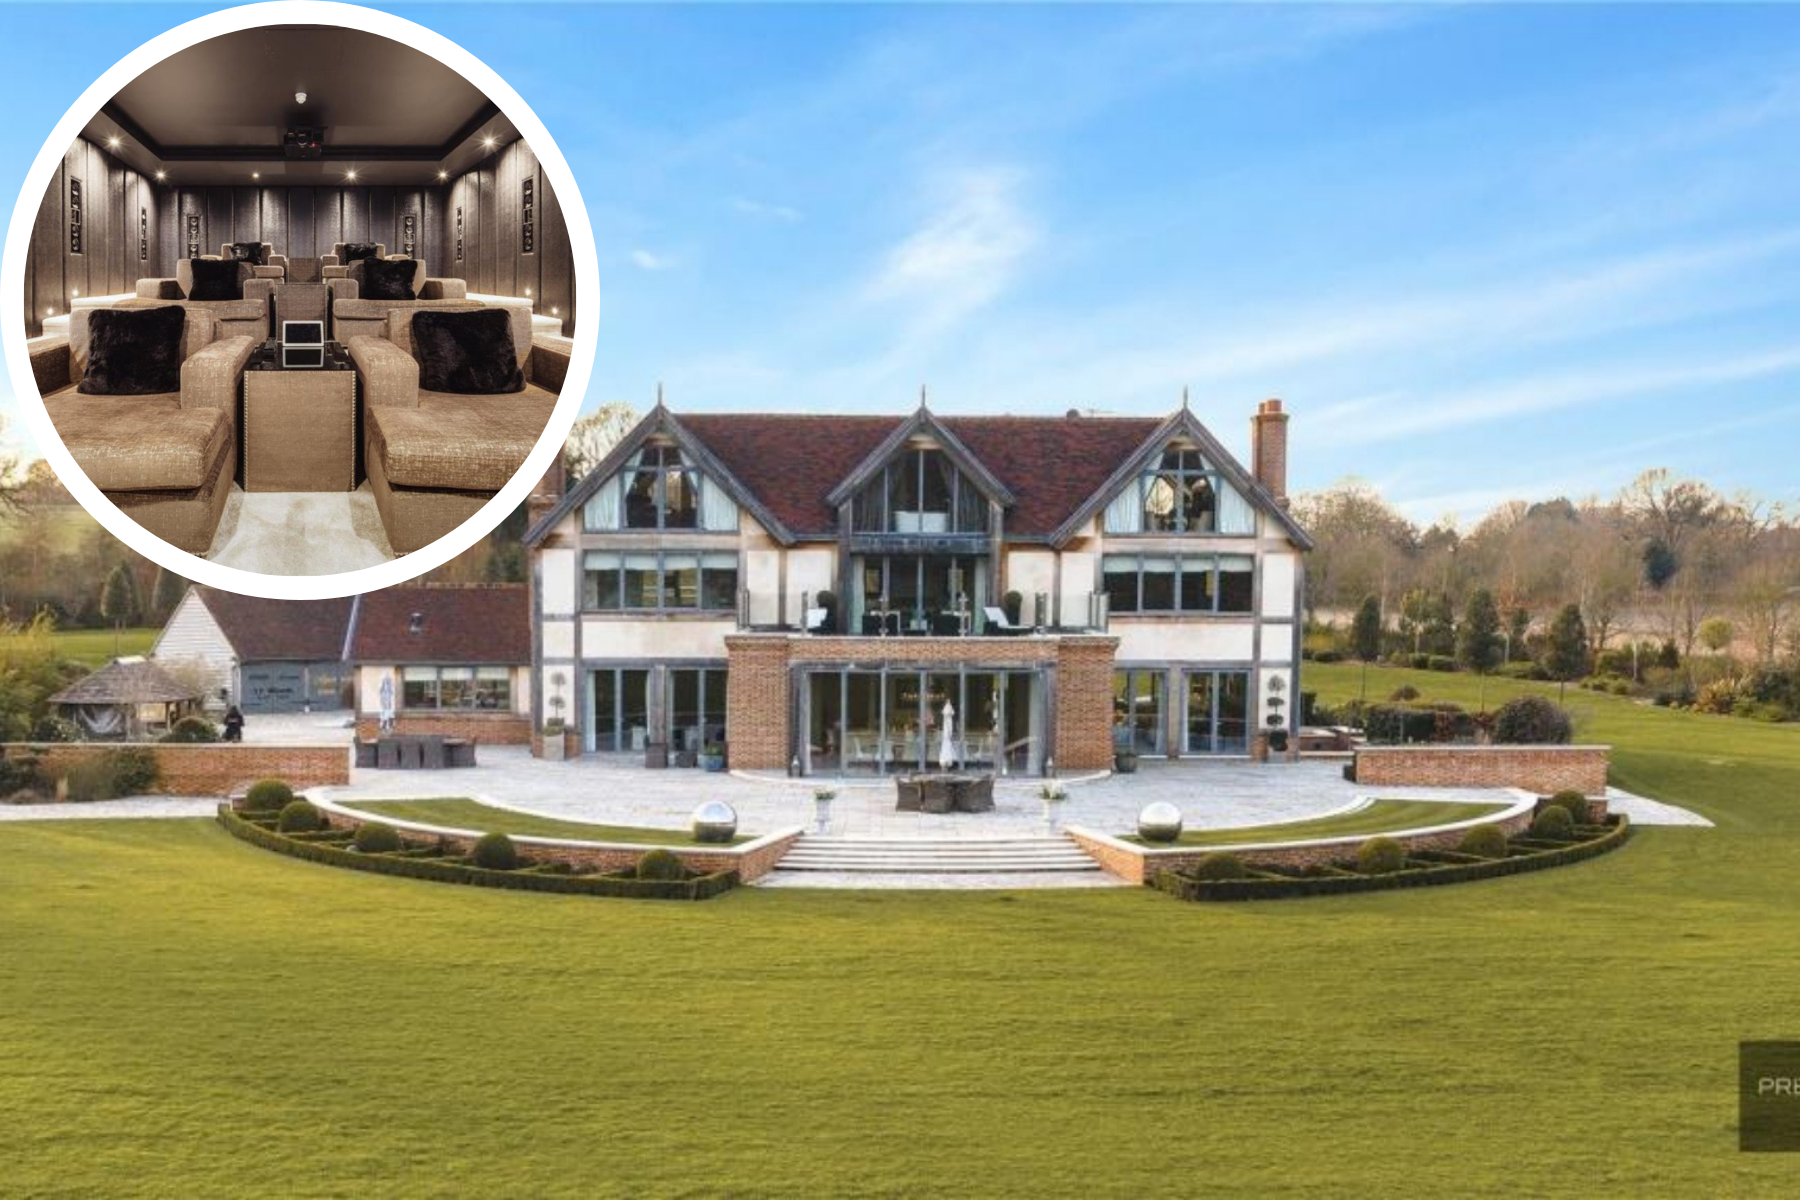 Look inside the £15 million home. (Rightmove)